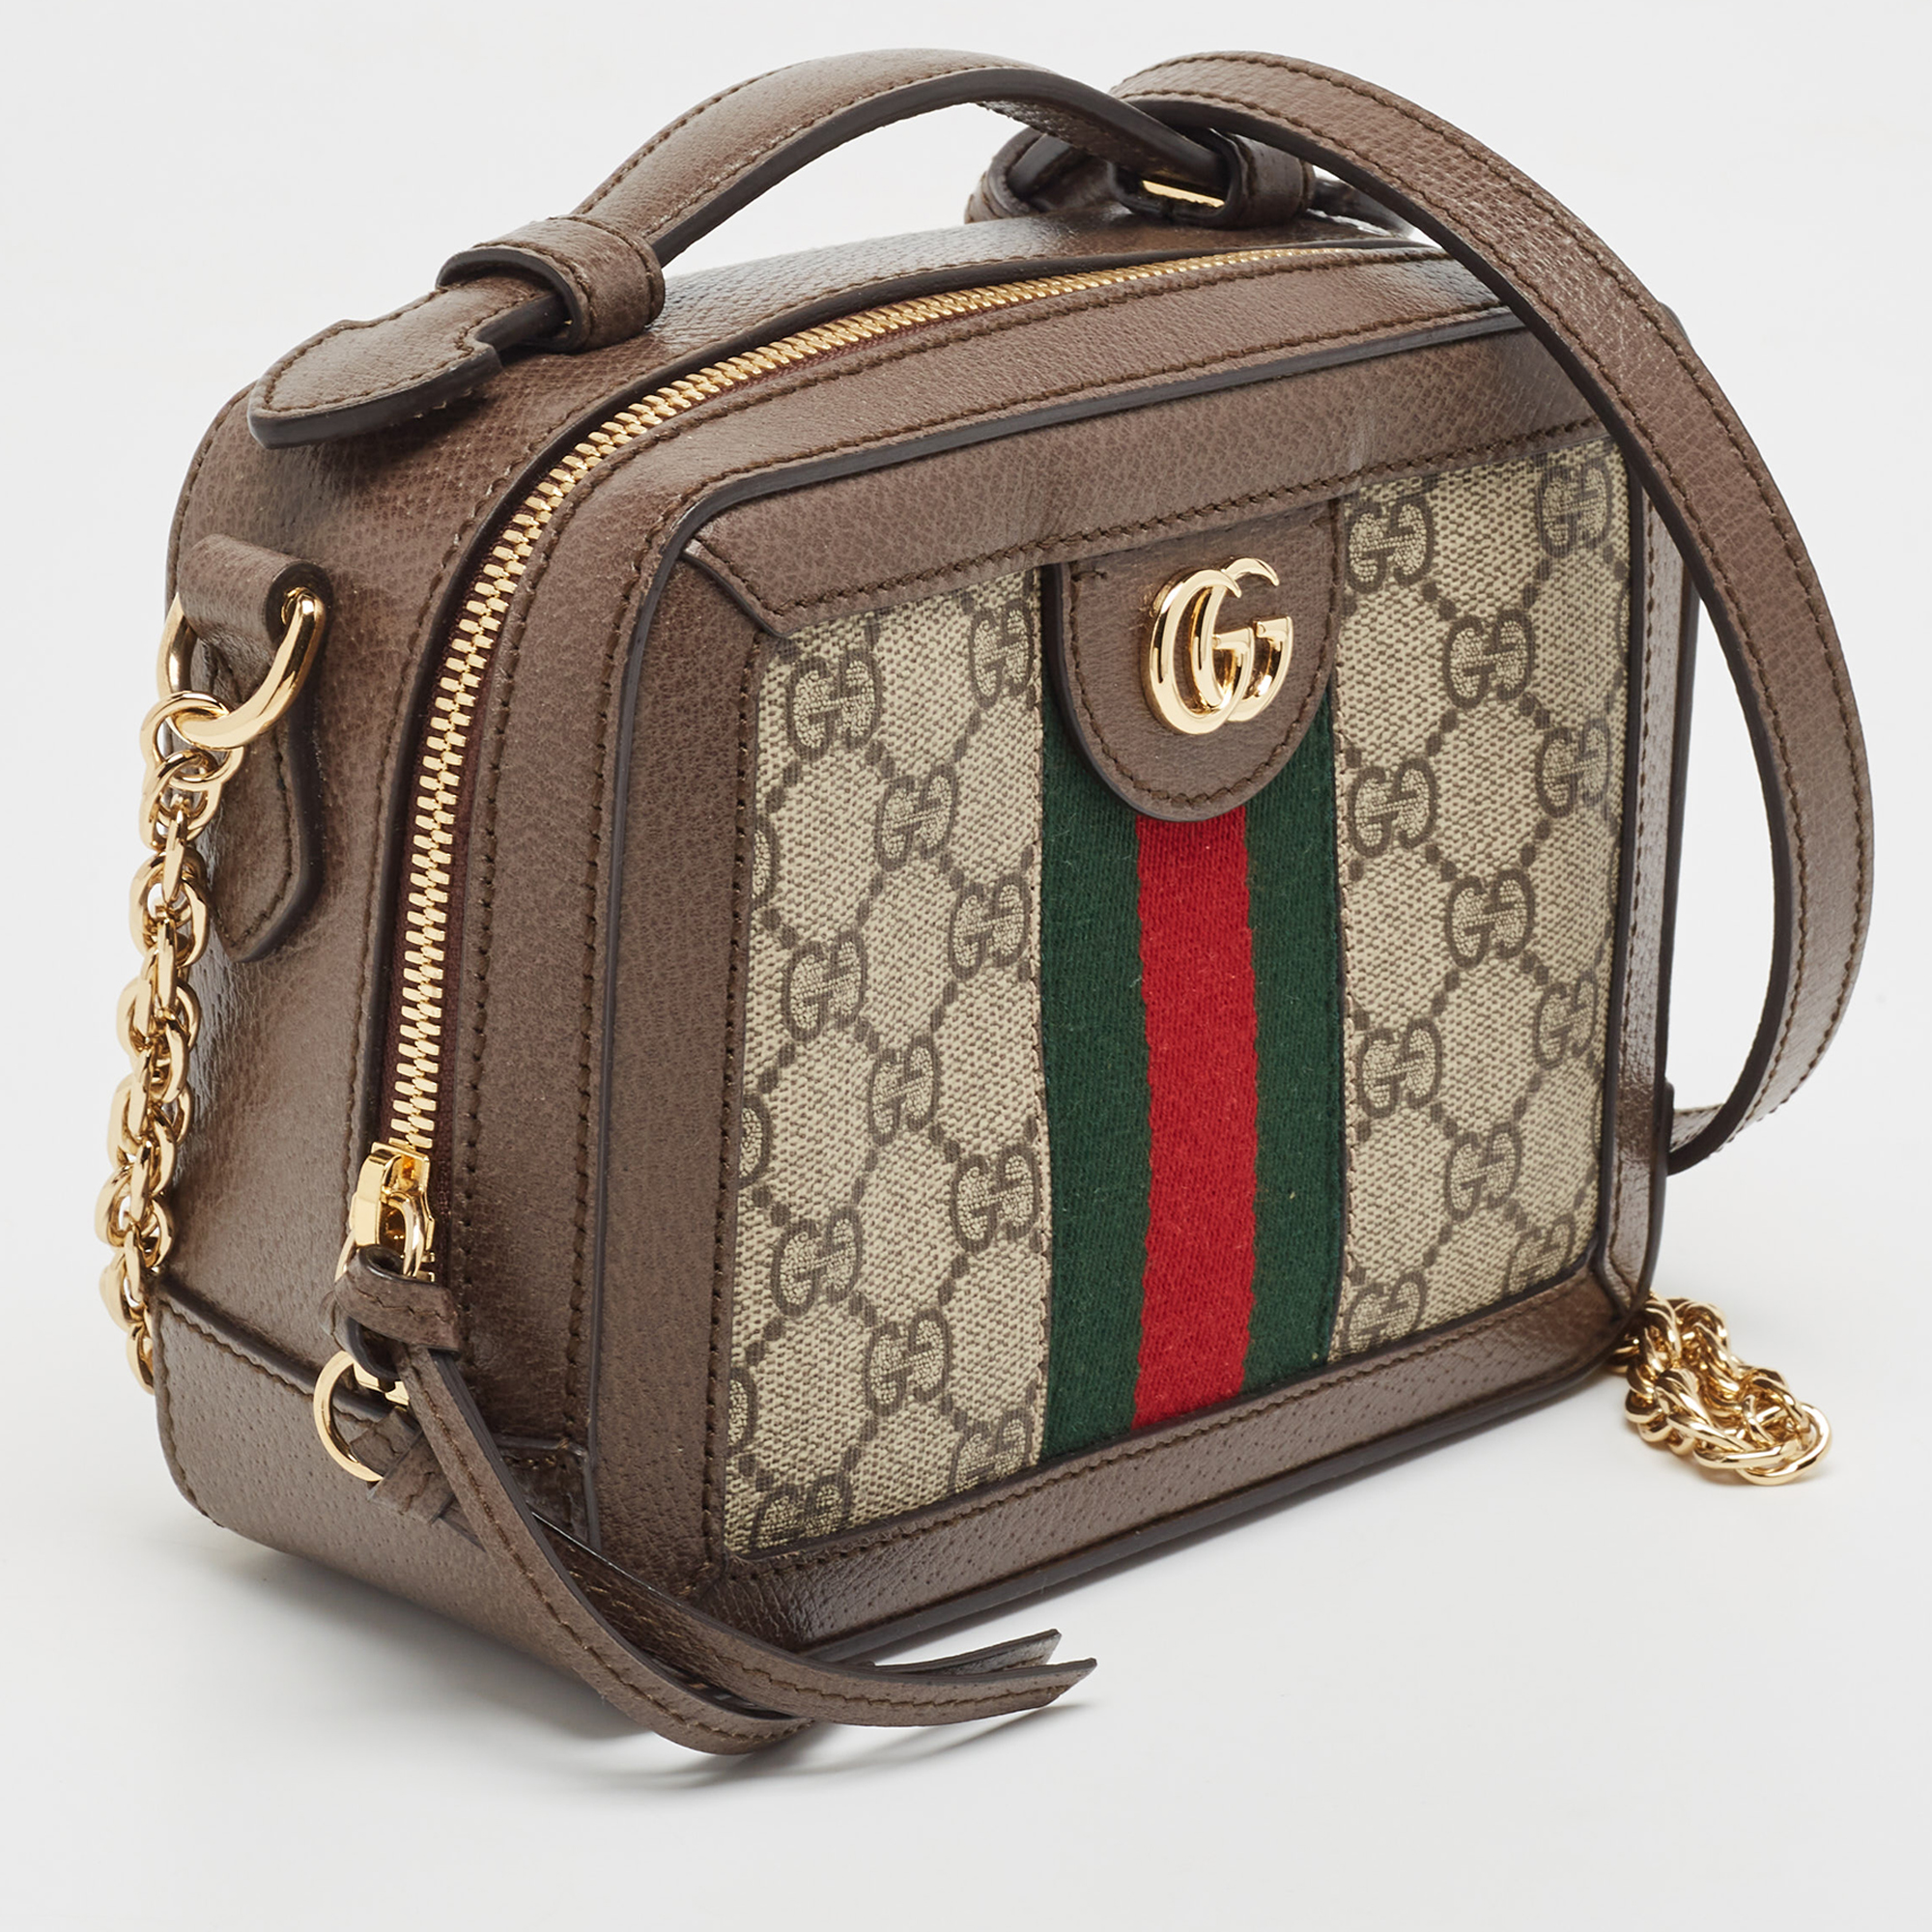 Gucci Beige/Ebony GG Supreme Canvas And Leather Mini Ophidia Top Handle Bag